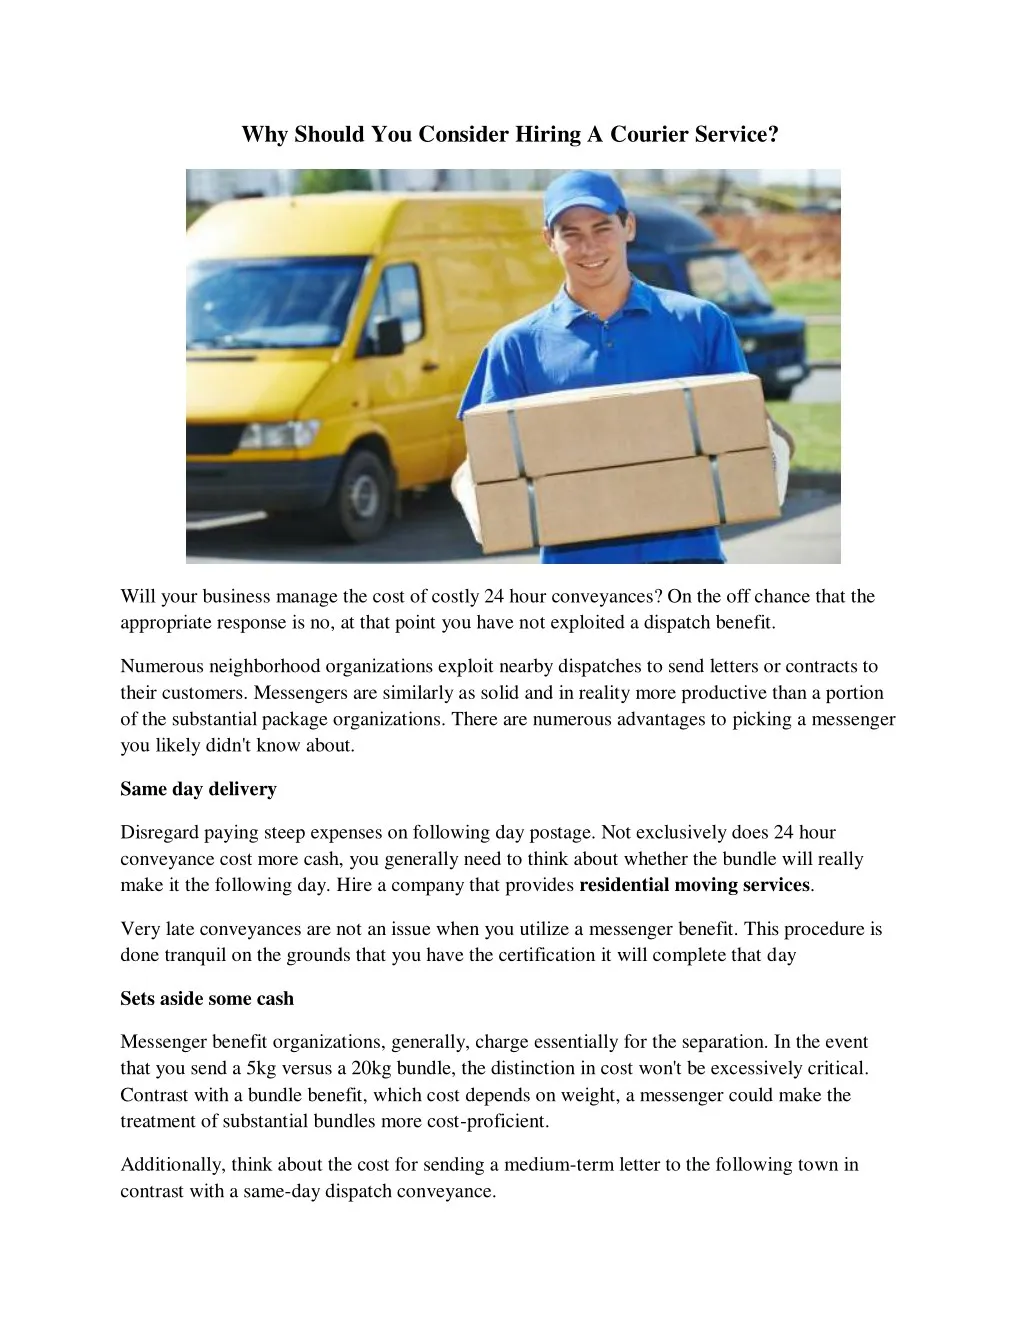 why should you consider hiring a courier service